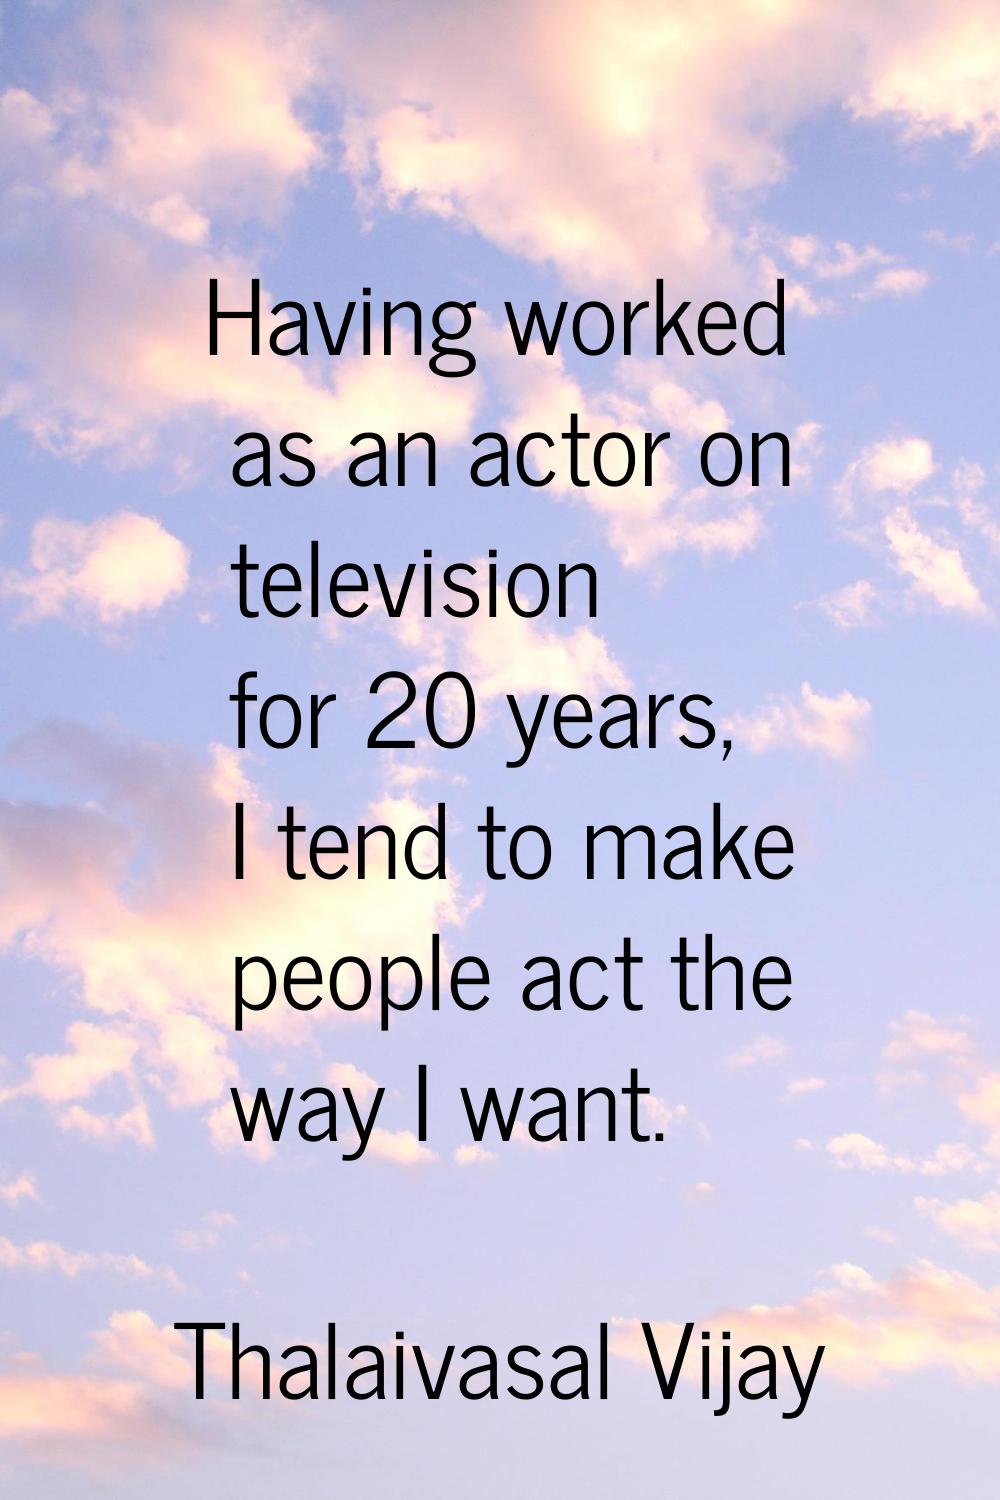 Having worked as an actor on television for 20 years, I tend to make people act the way I want.